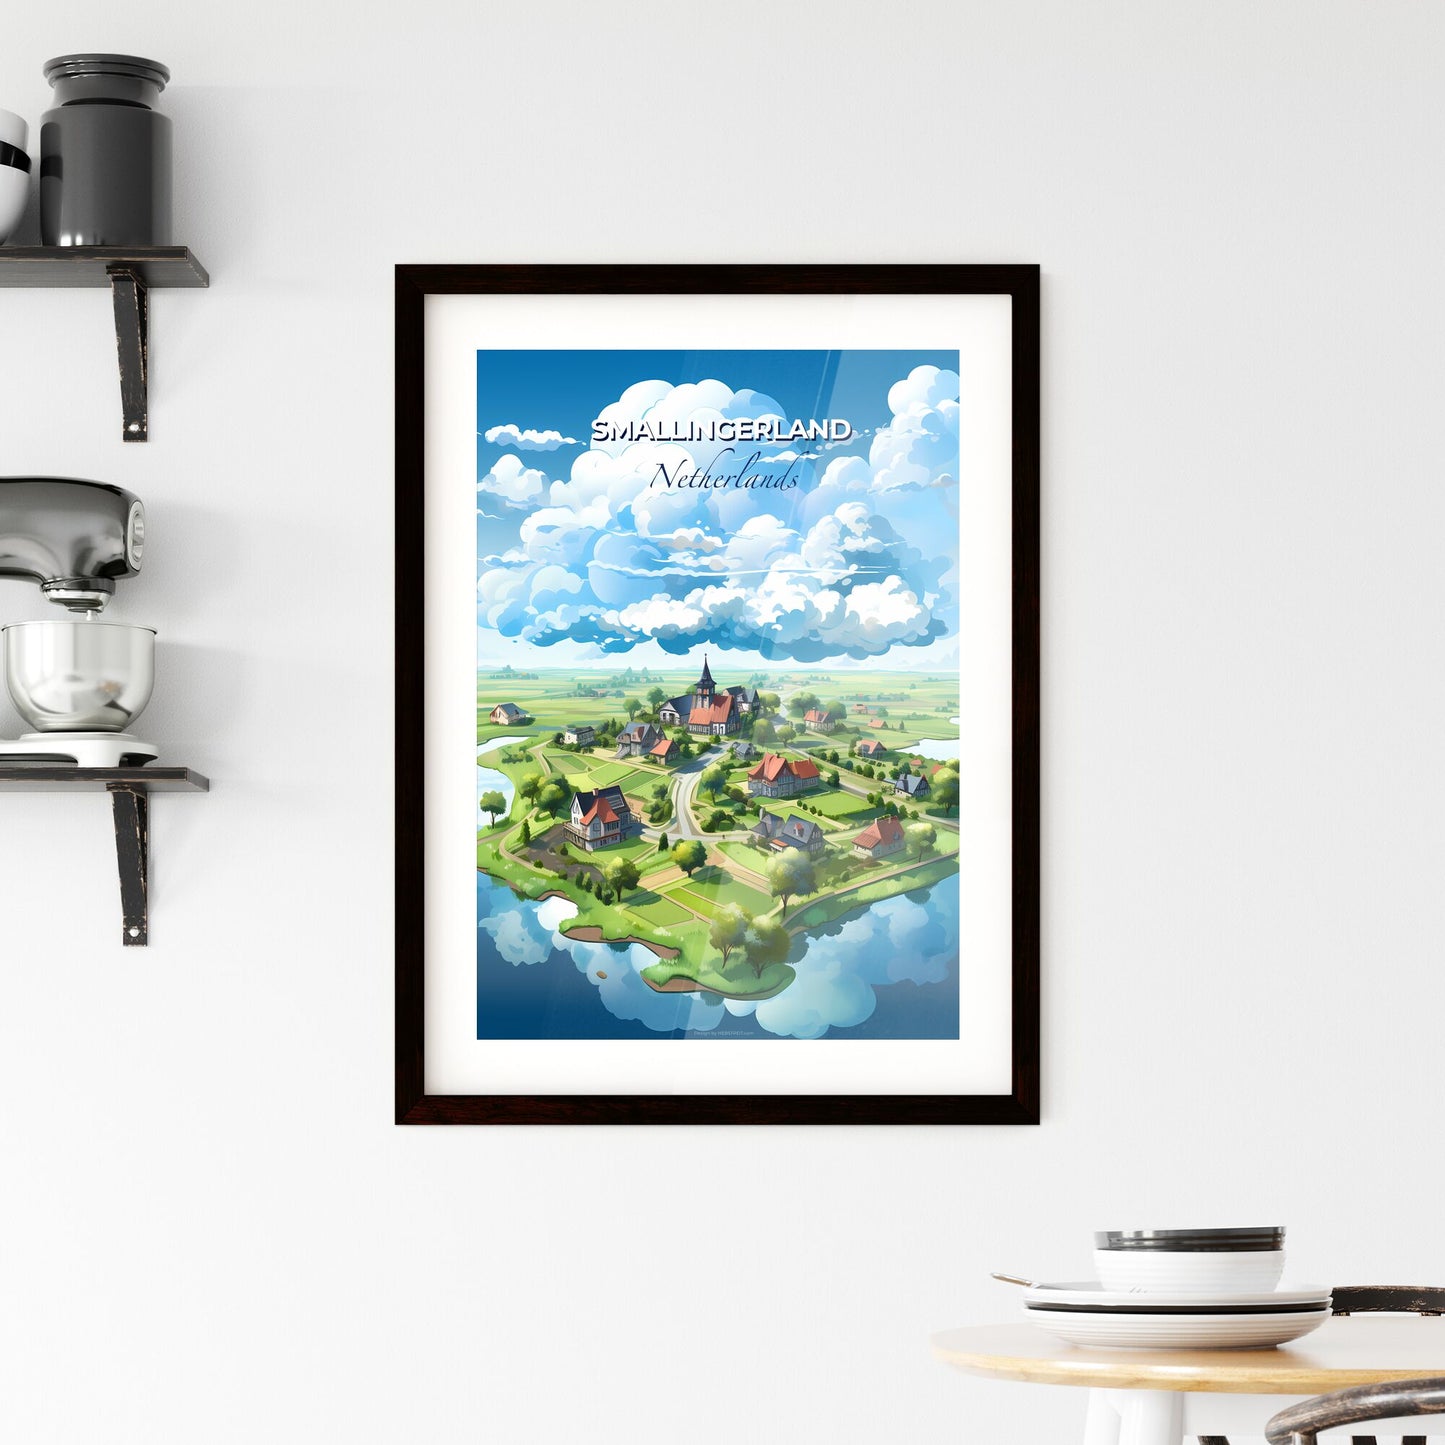 Smallingerland, Netherlands, A Poster of a cartoon of a small island with houses and trees Default Title